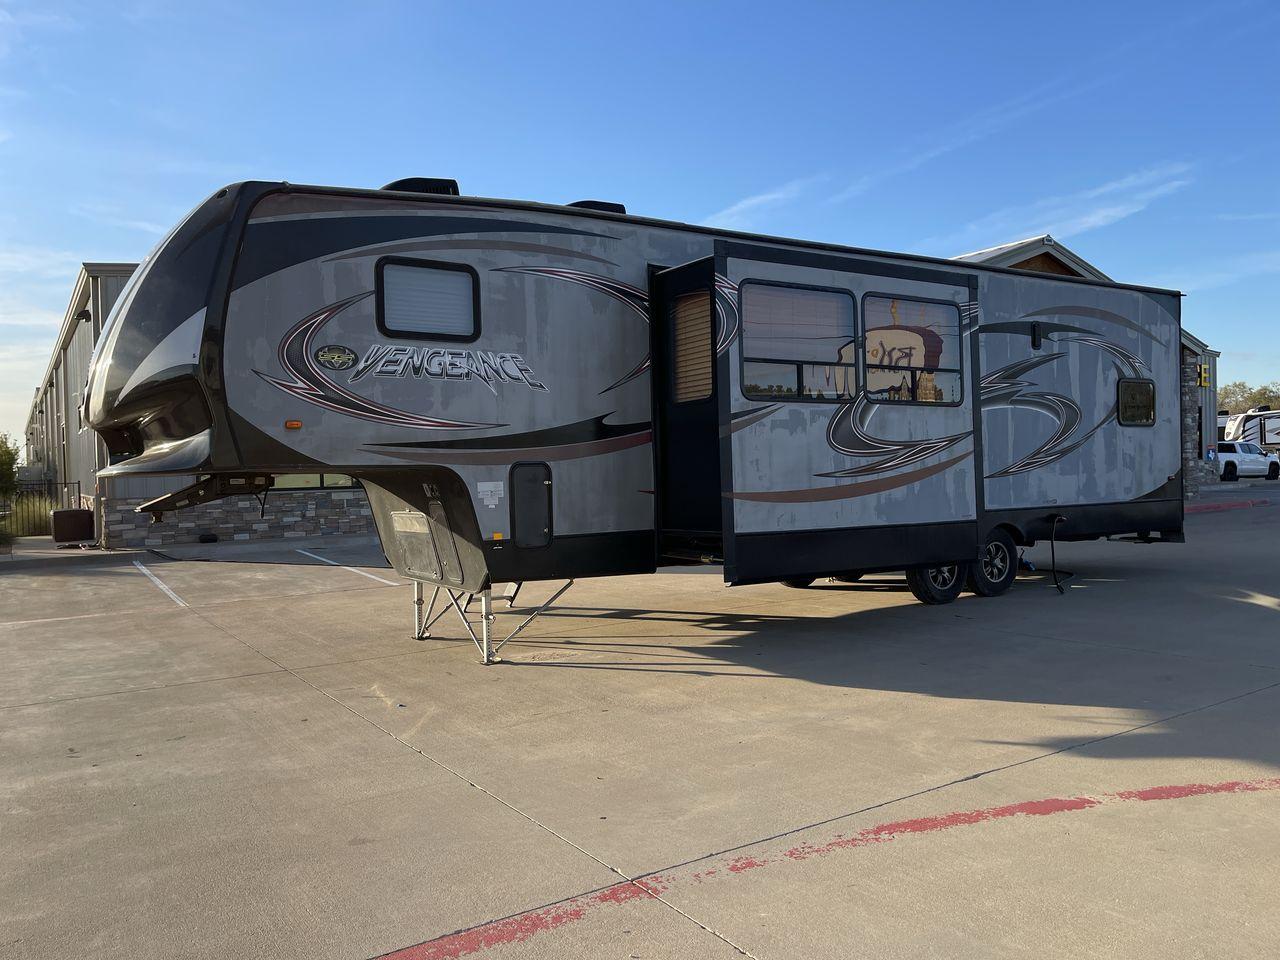 2014 WHITE FOREST RIVER VENGEANCE 312A (4X4FVGG22EY) , Length: 37.92 ft. | Dry Weight: 10,068 lbs. | Gross Weight: 14,508 lbs. | Slides: 1 transmission, located at 4319 N Main St, Cleburne, TX, 76033, (817) 678-5133, 32.385960, -97.391212 - This 2014 Vengeance Toy Hauler has a dry weight of 10,068 lbs and a GVWR of 14,508 lbs with a hitch weight of 2,508 lbs. This unit also has automatic heating and cooling for optimal temperature control. The exterior of this toy hauler is a simple cream base with black and red accents. This model als - Photo #22